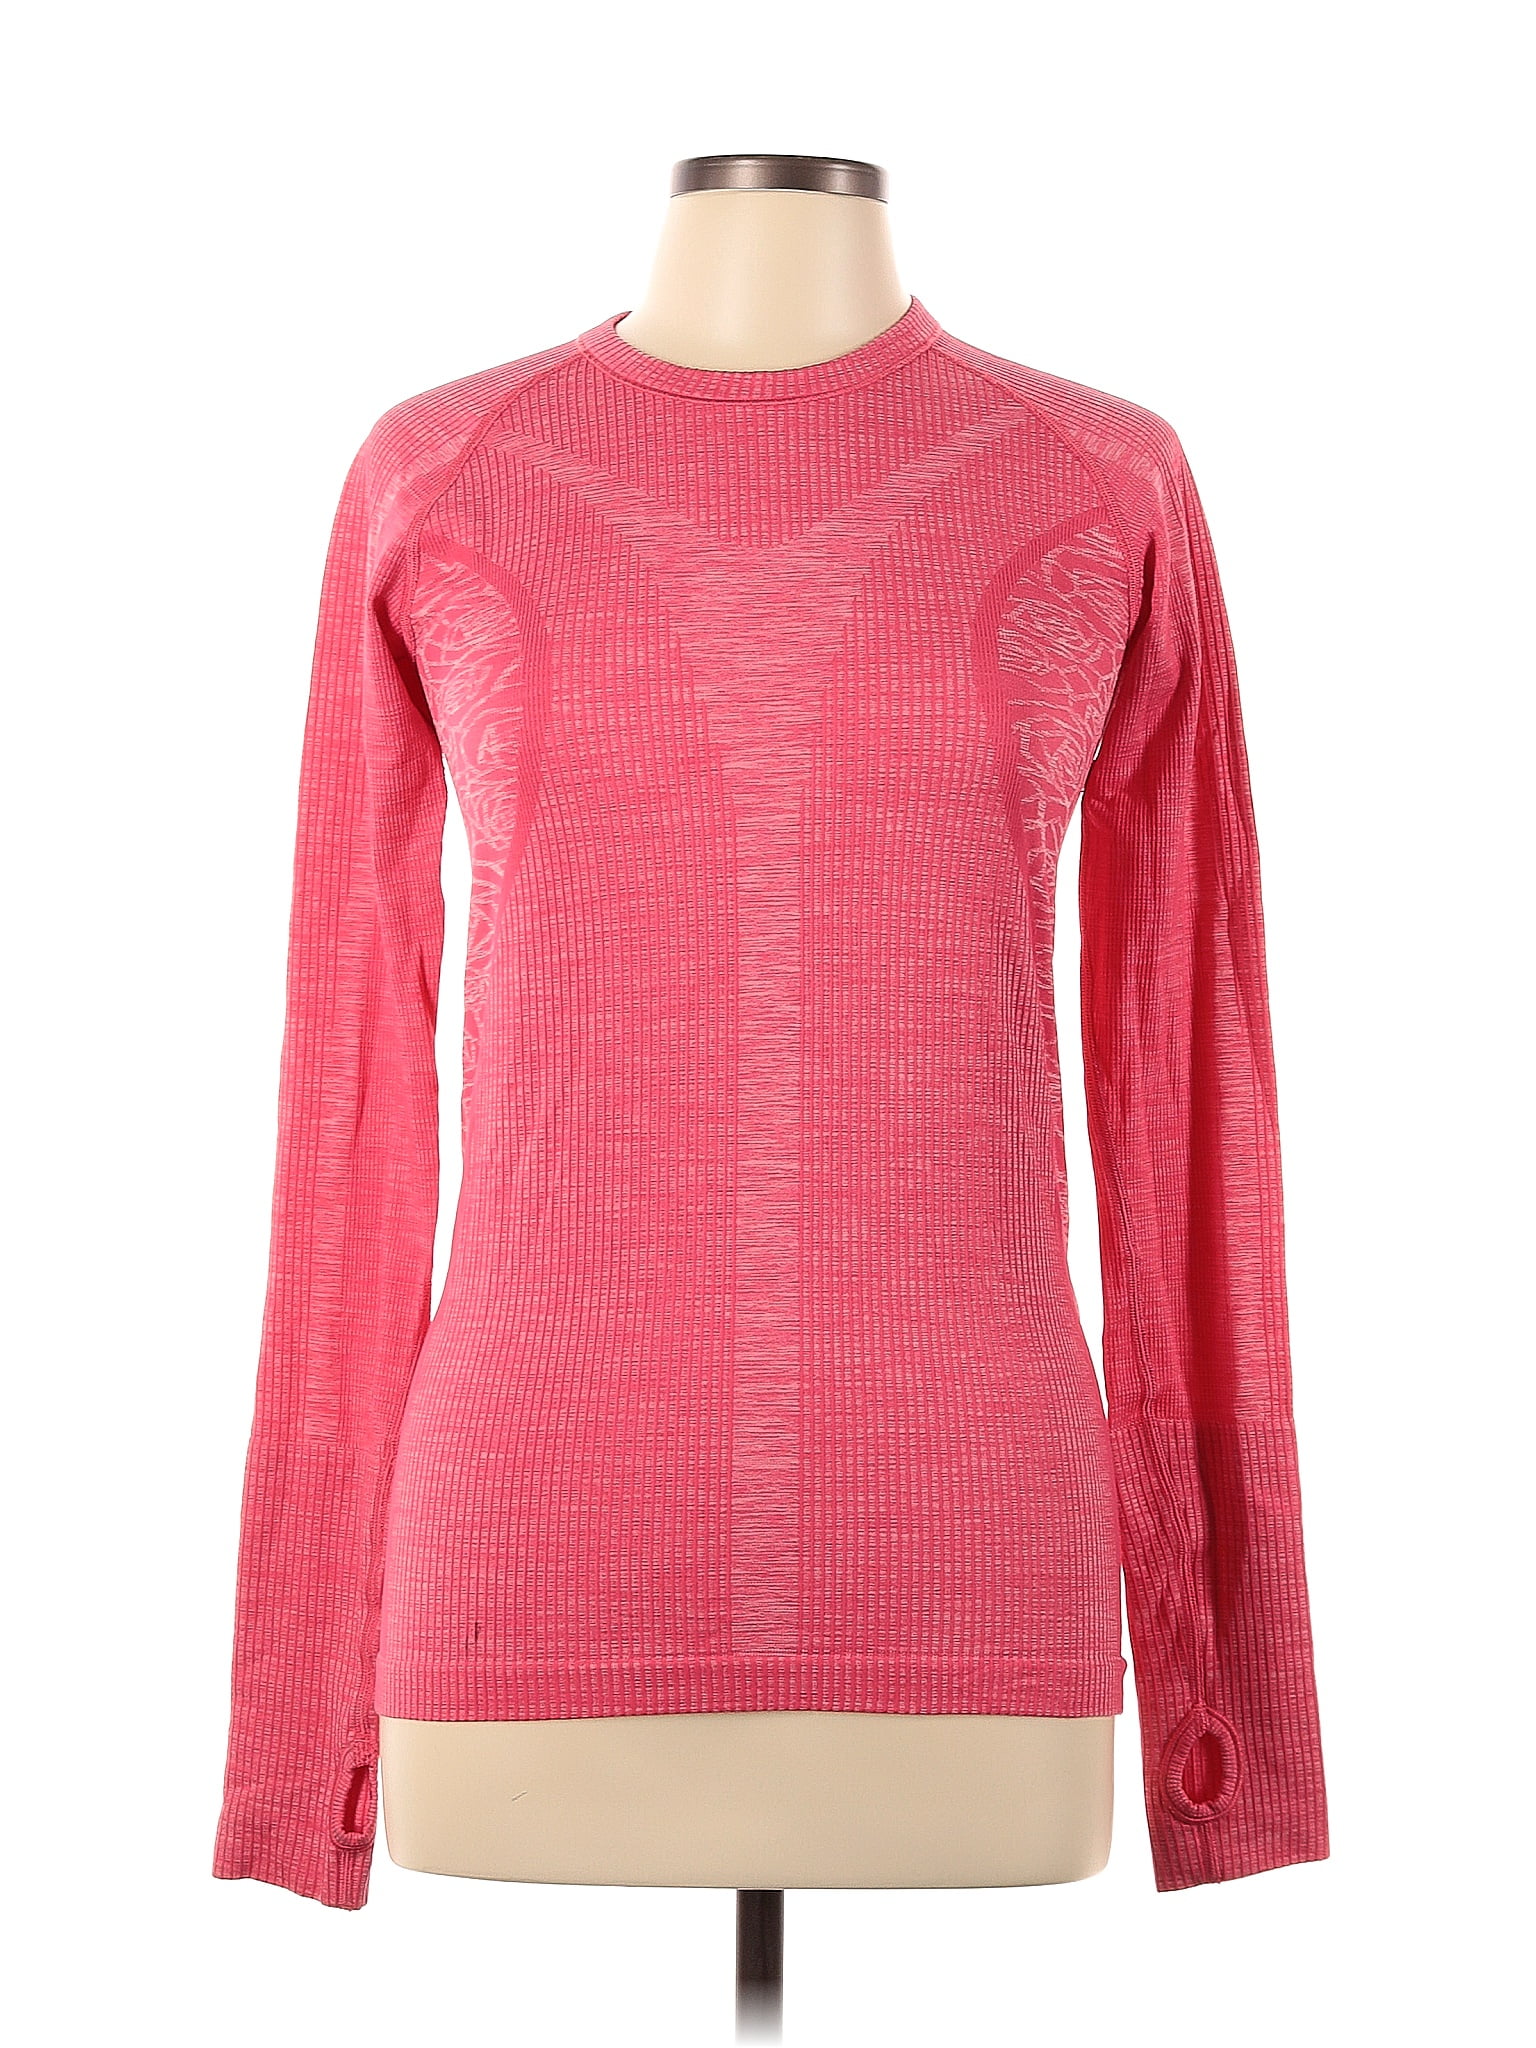 Lululemon Athletica Pink Red Active T-Shirt Size 10 - 45% off